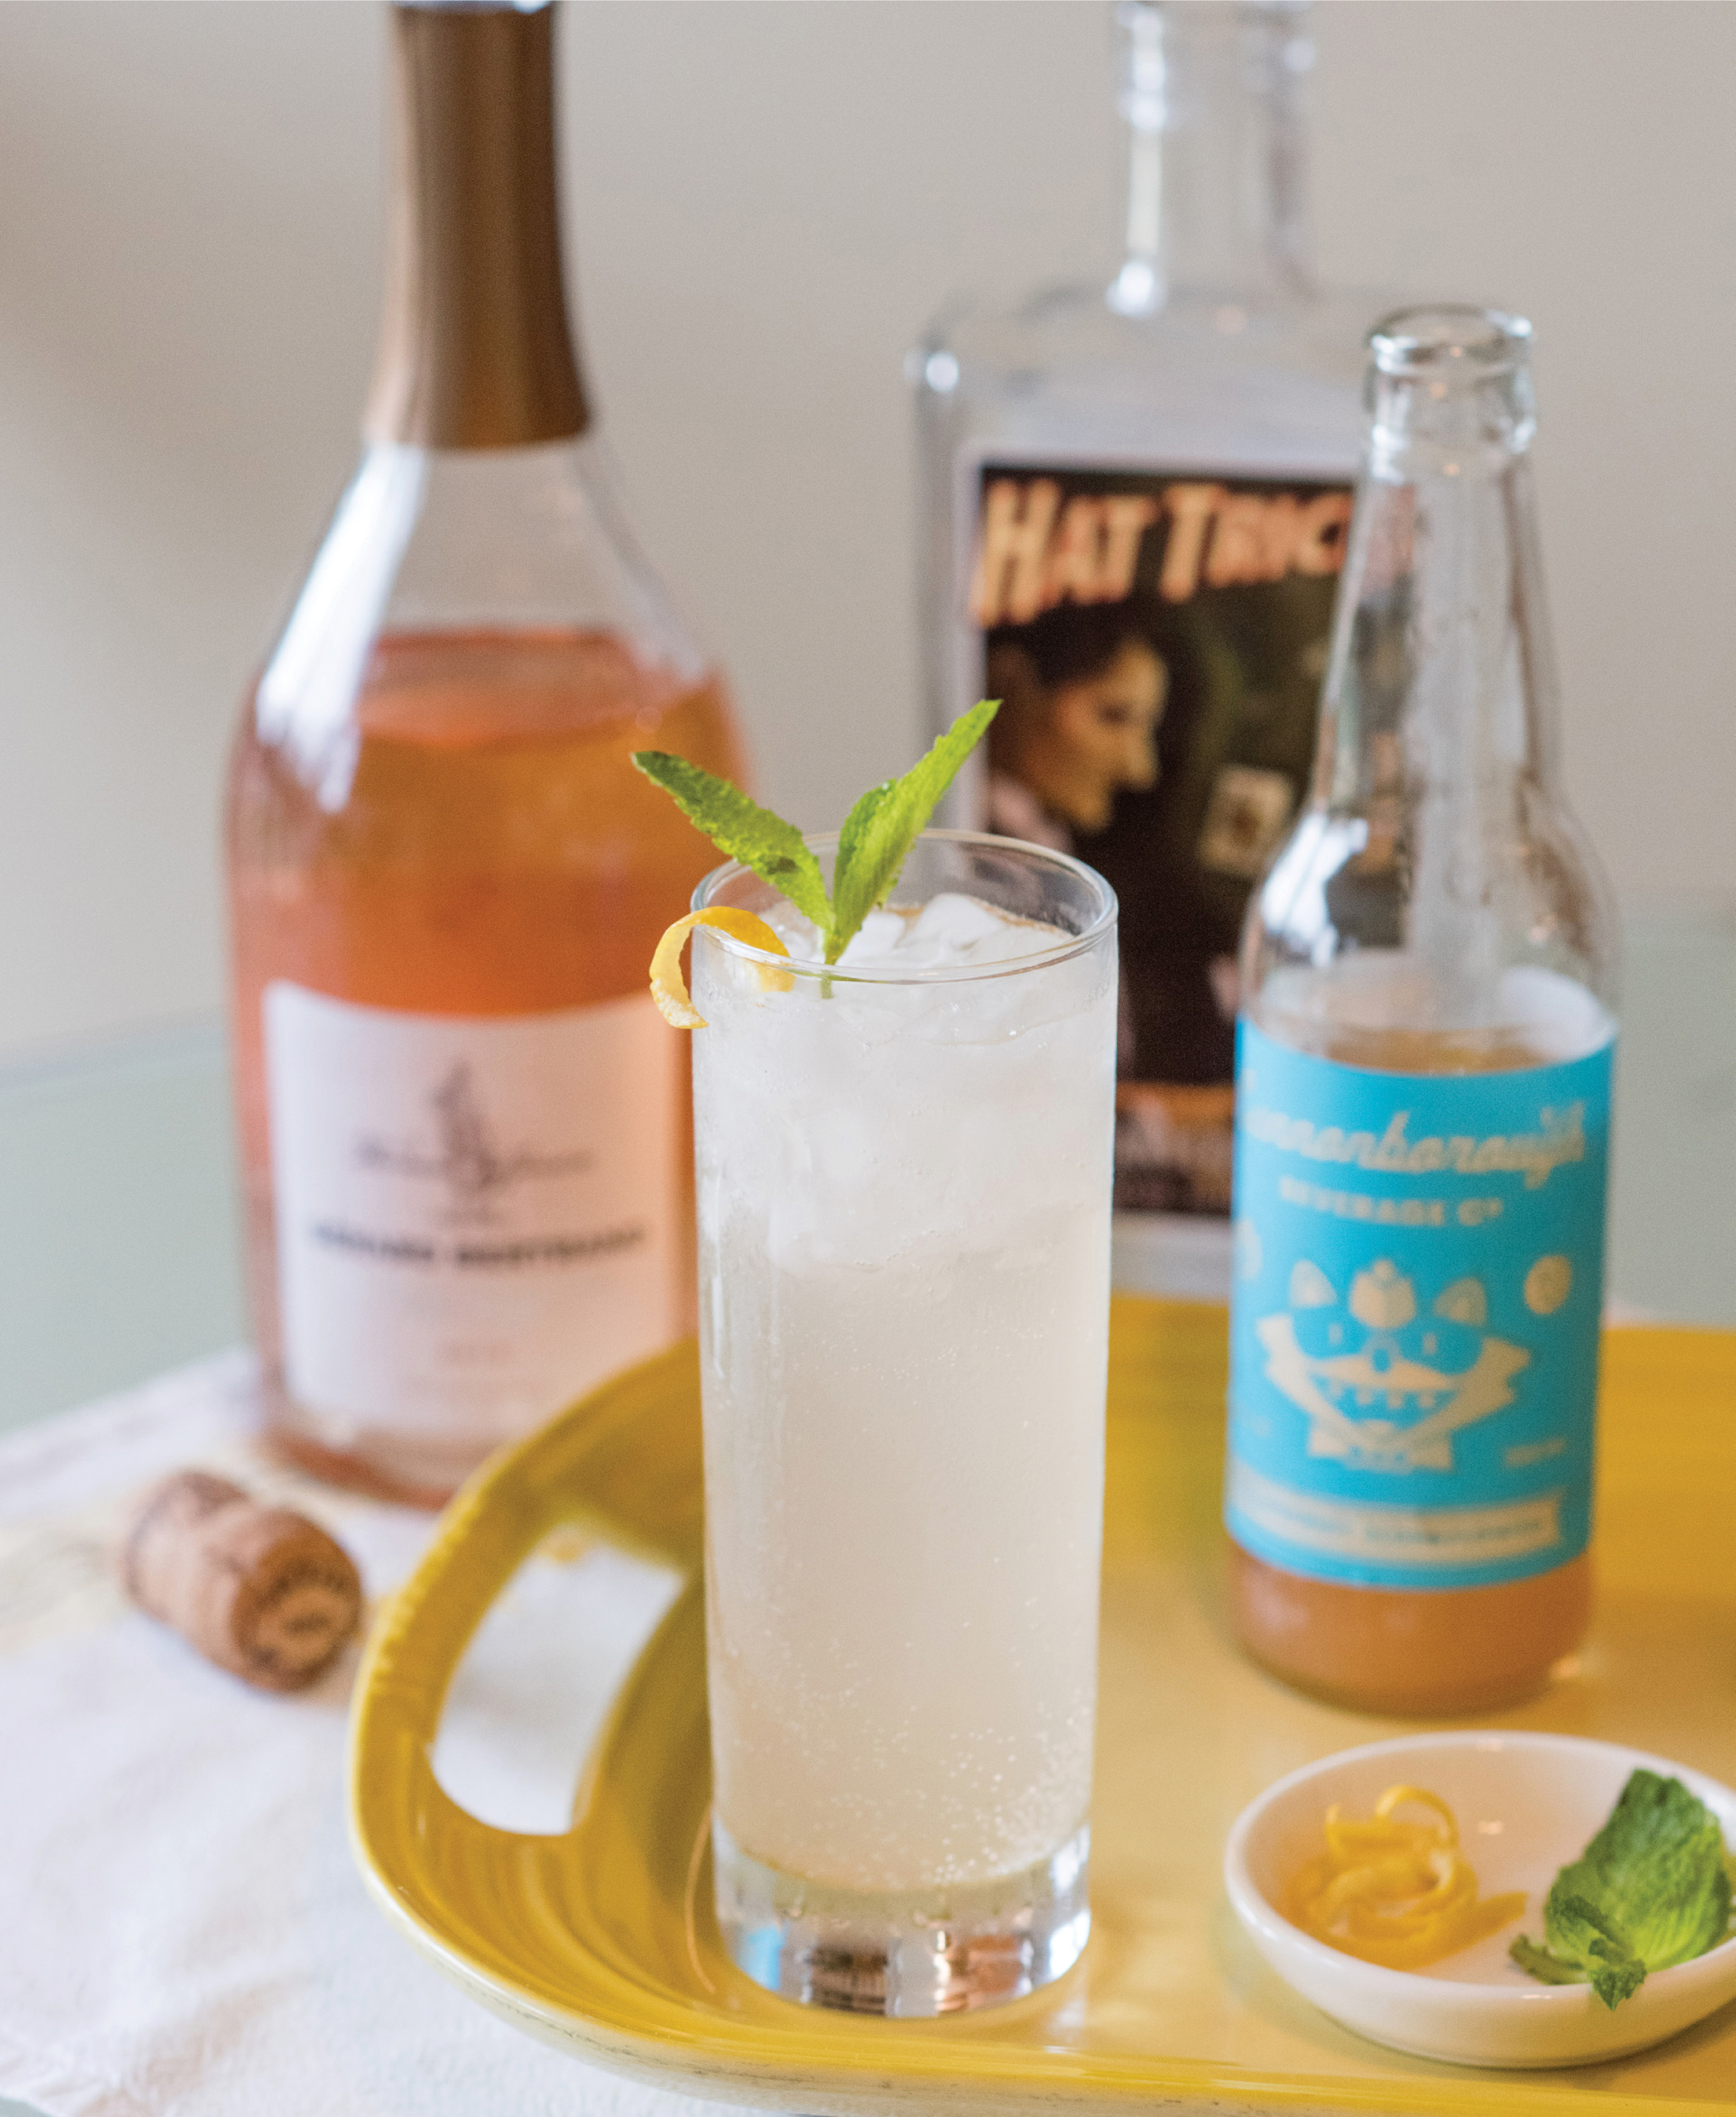 Floral gin, grapefruit soda, and sparkling rosé combine in this bright, refreshing sip. Pair it with pastry chef Andrea Upchurch’s Charleston-style quiche and lemon cake with berries, and you’ve got a supper fit for an easy afternoon.